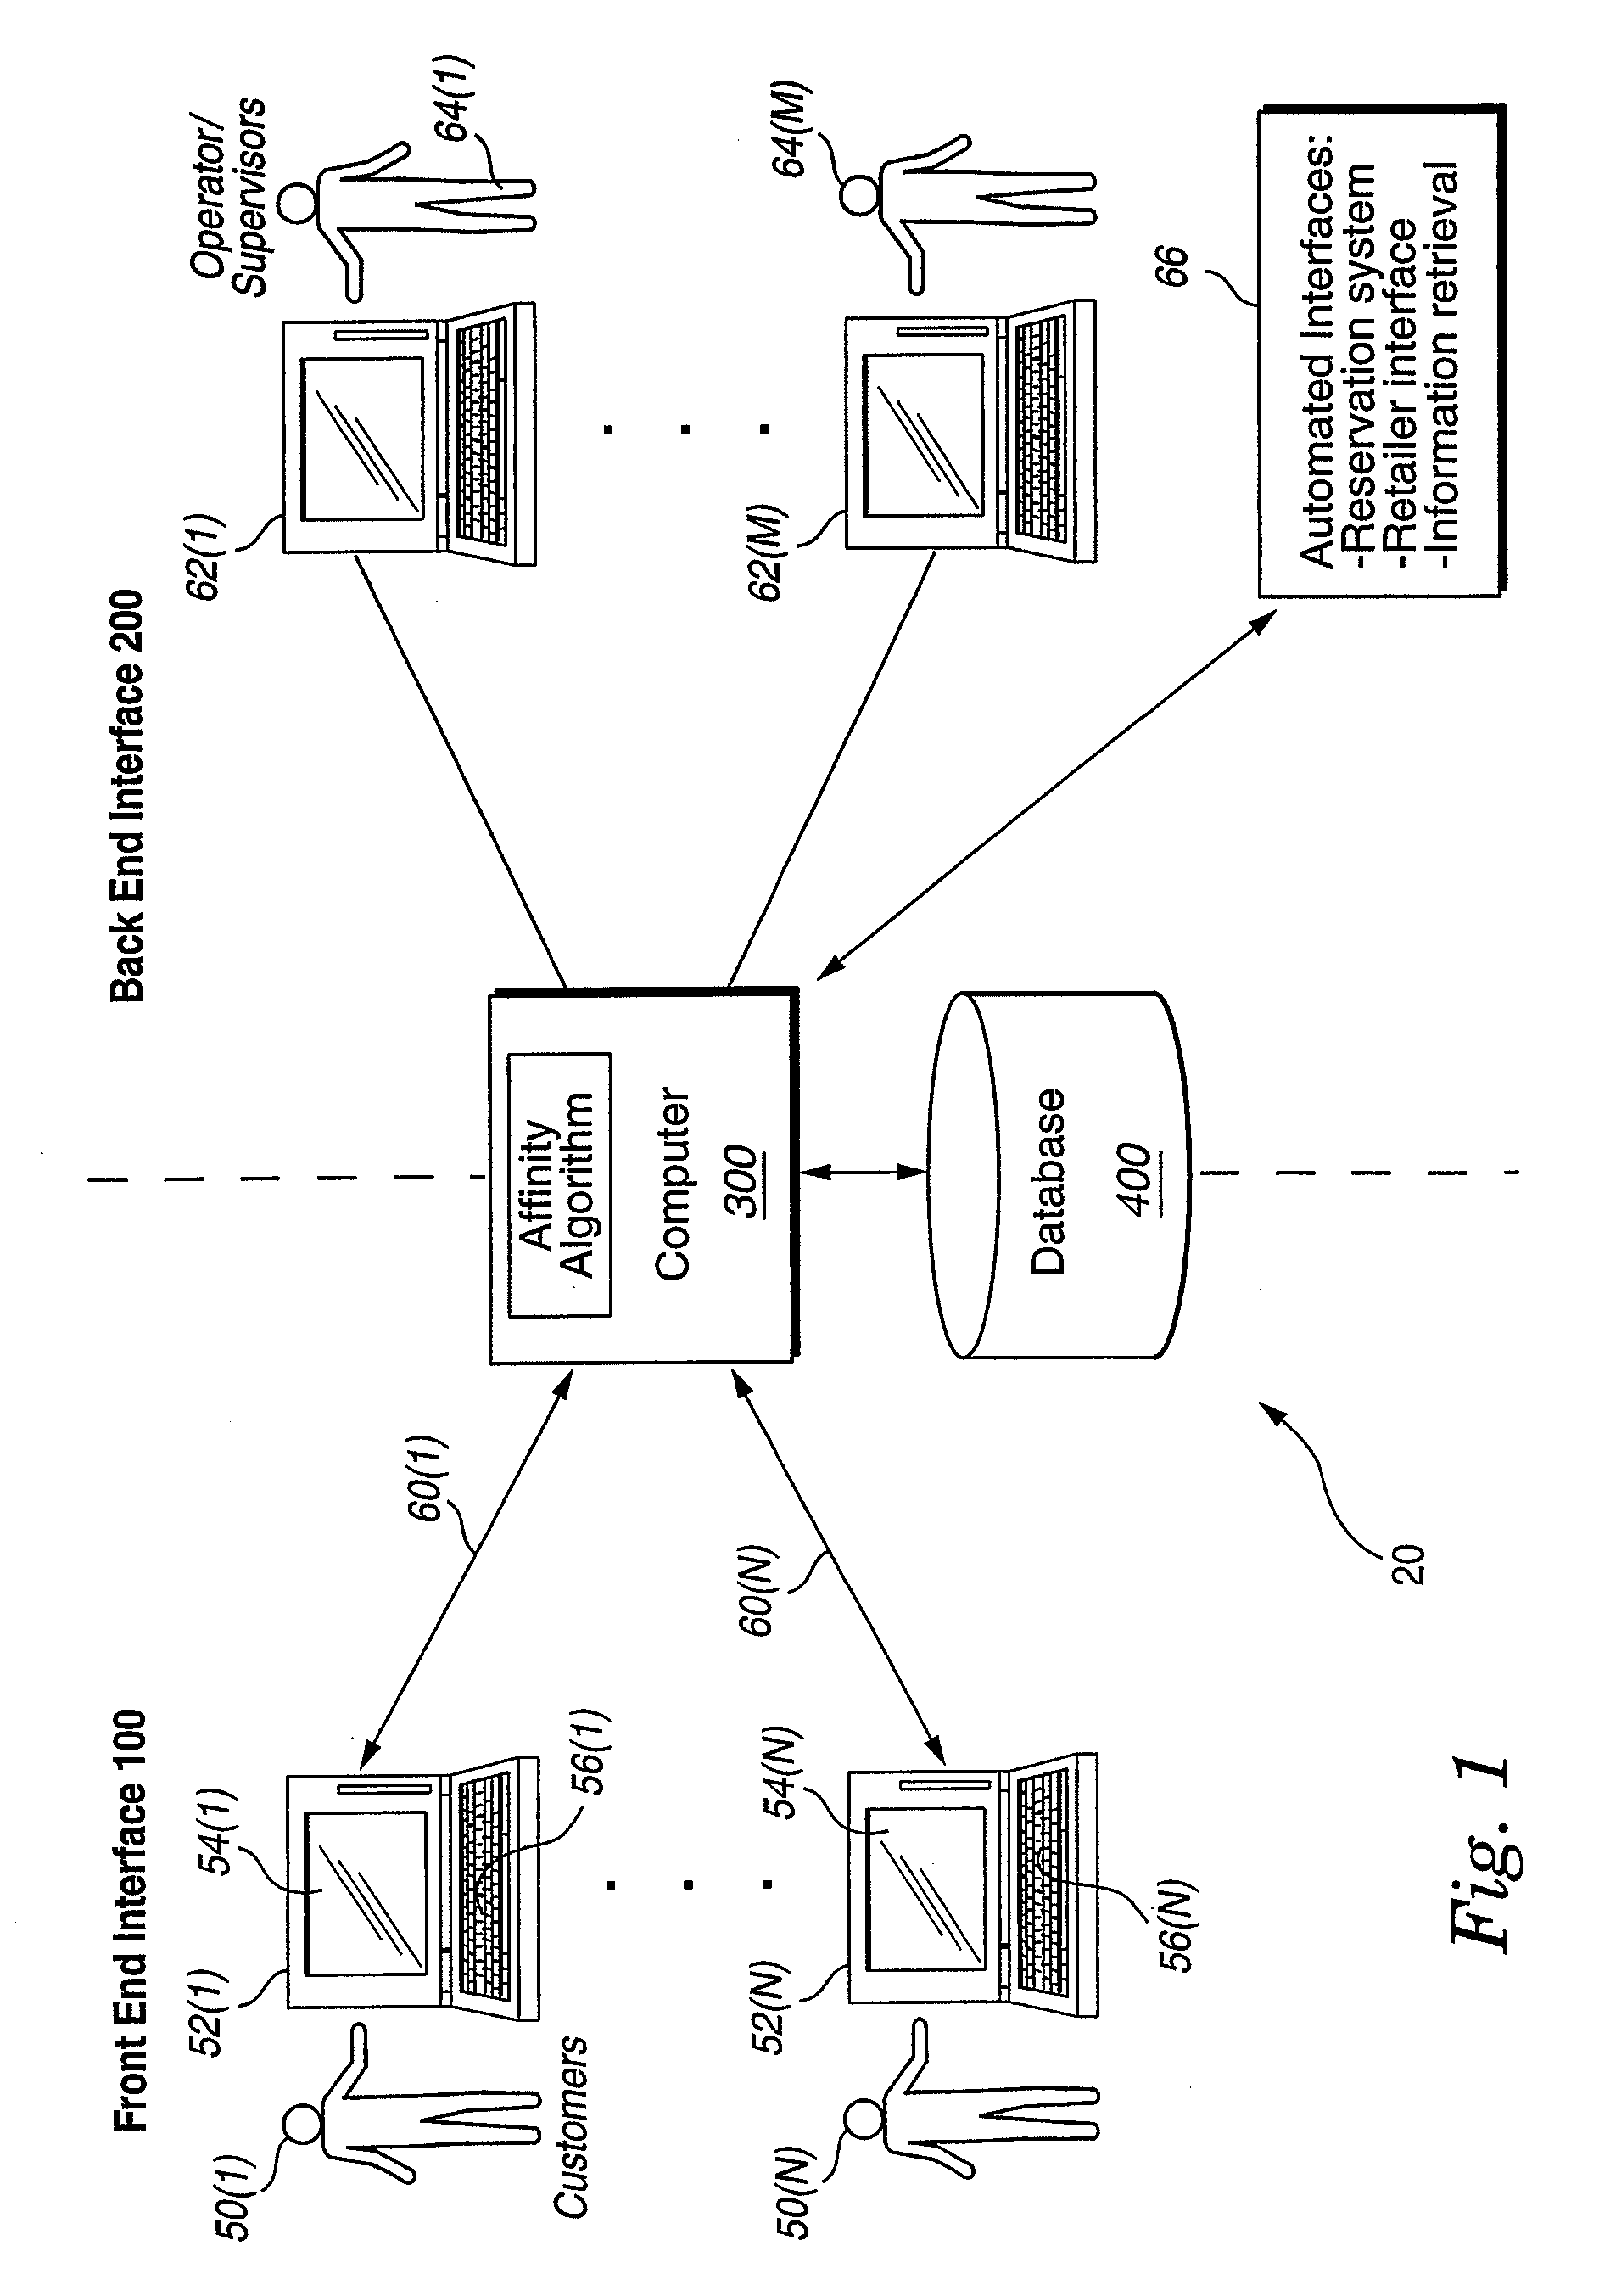 System and Method for Grouping and Selling Products or Services